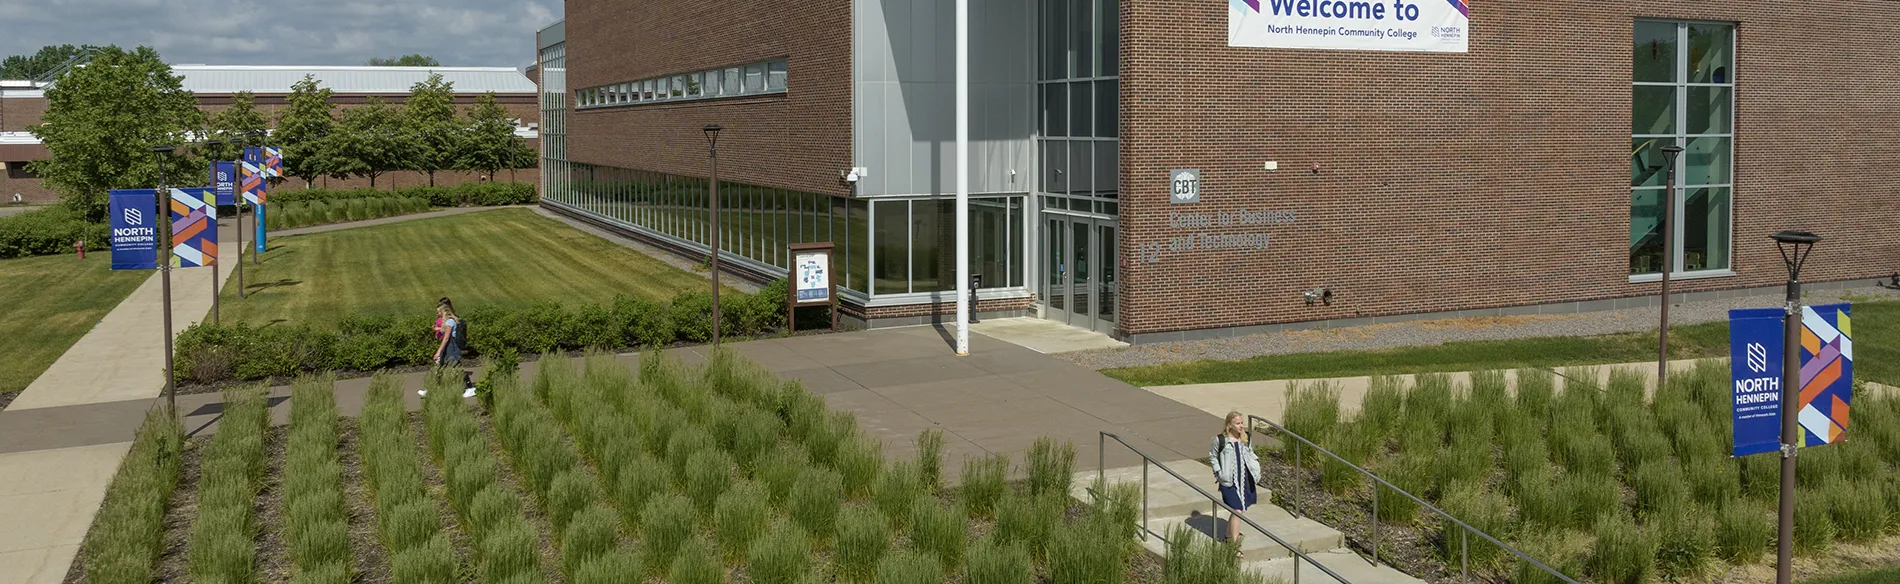 drone view of the campus building with students walking